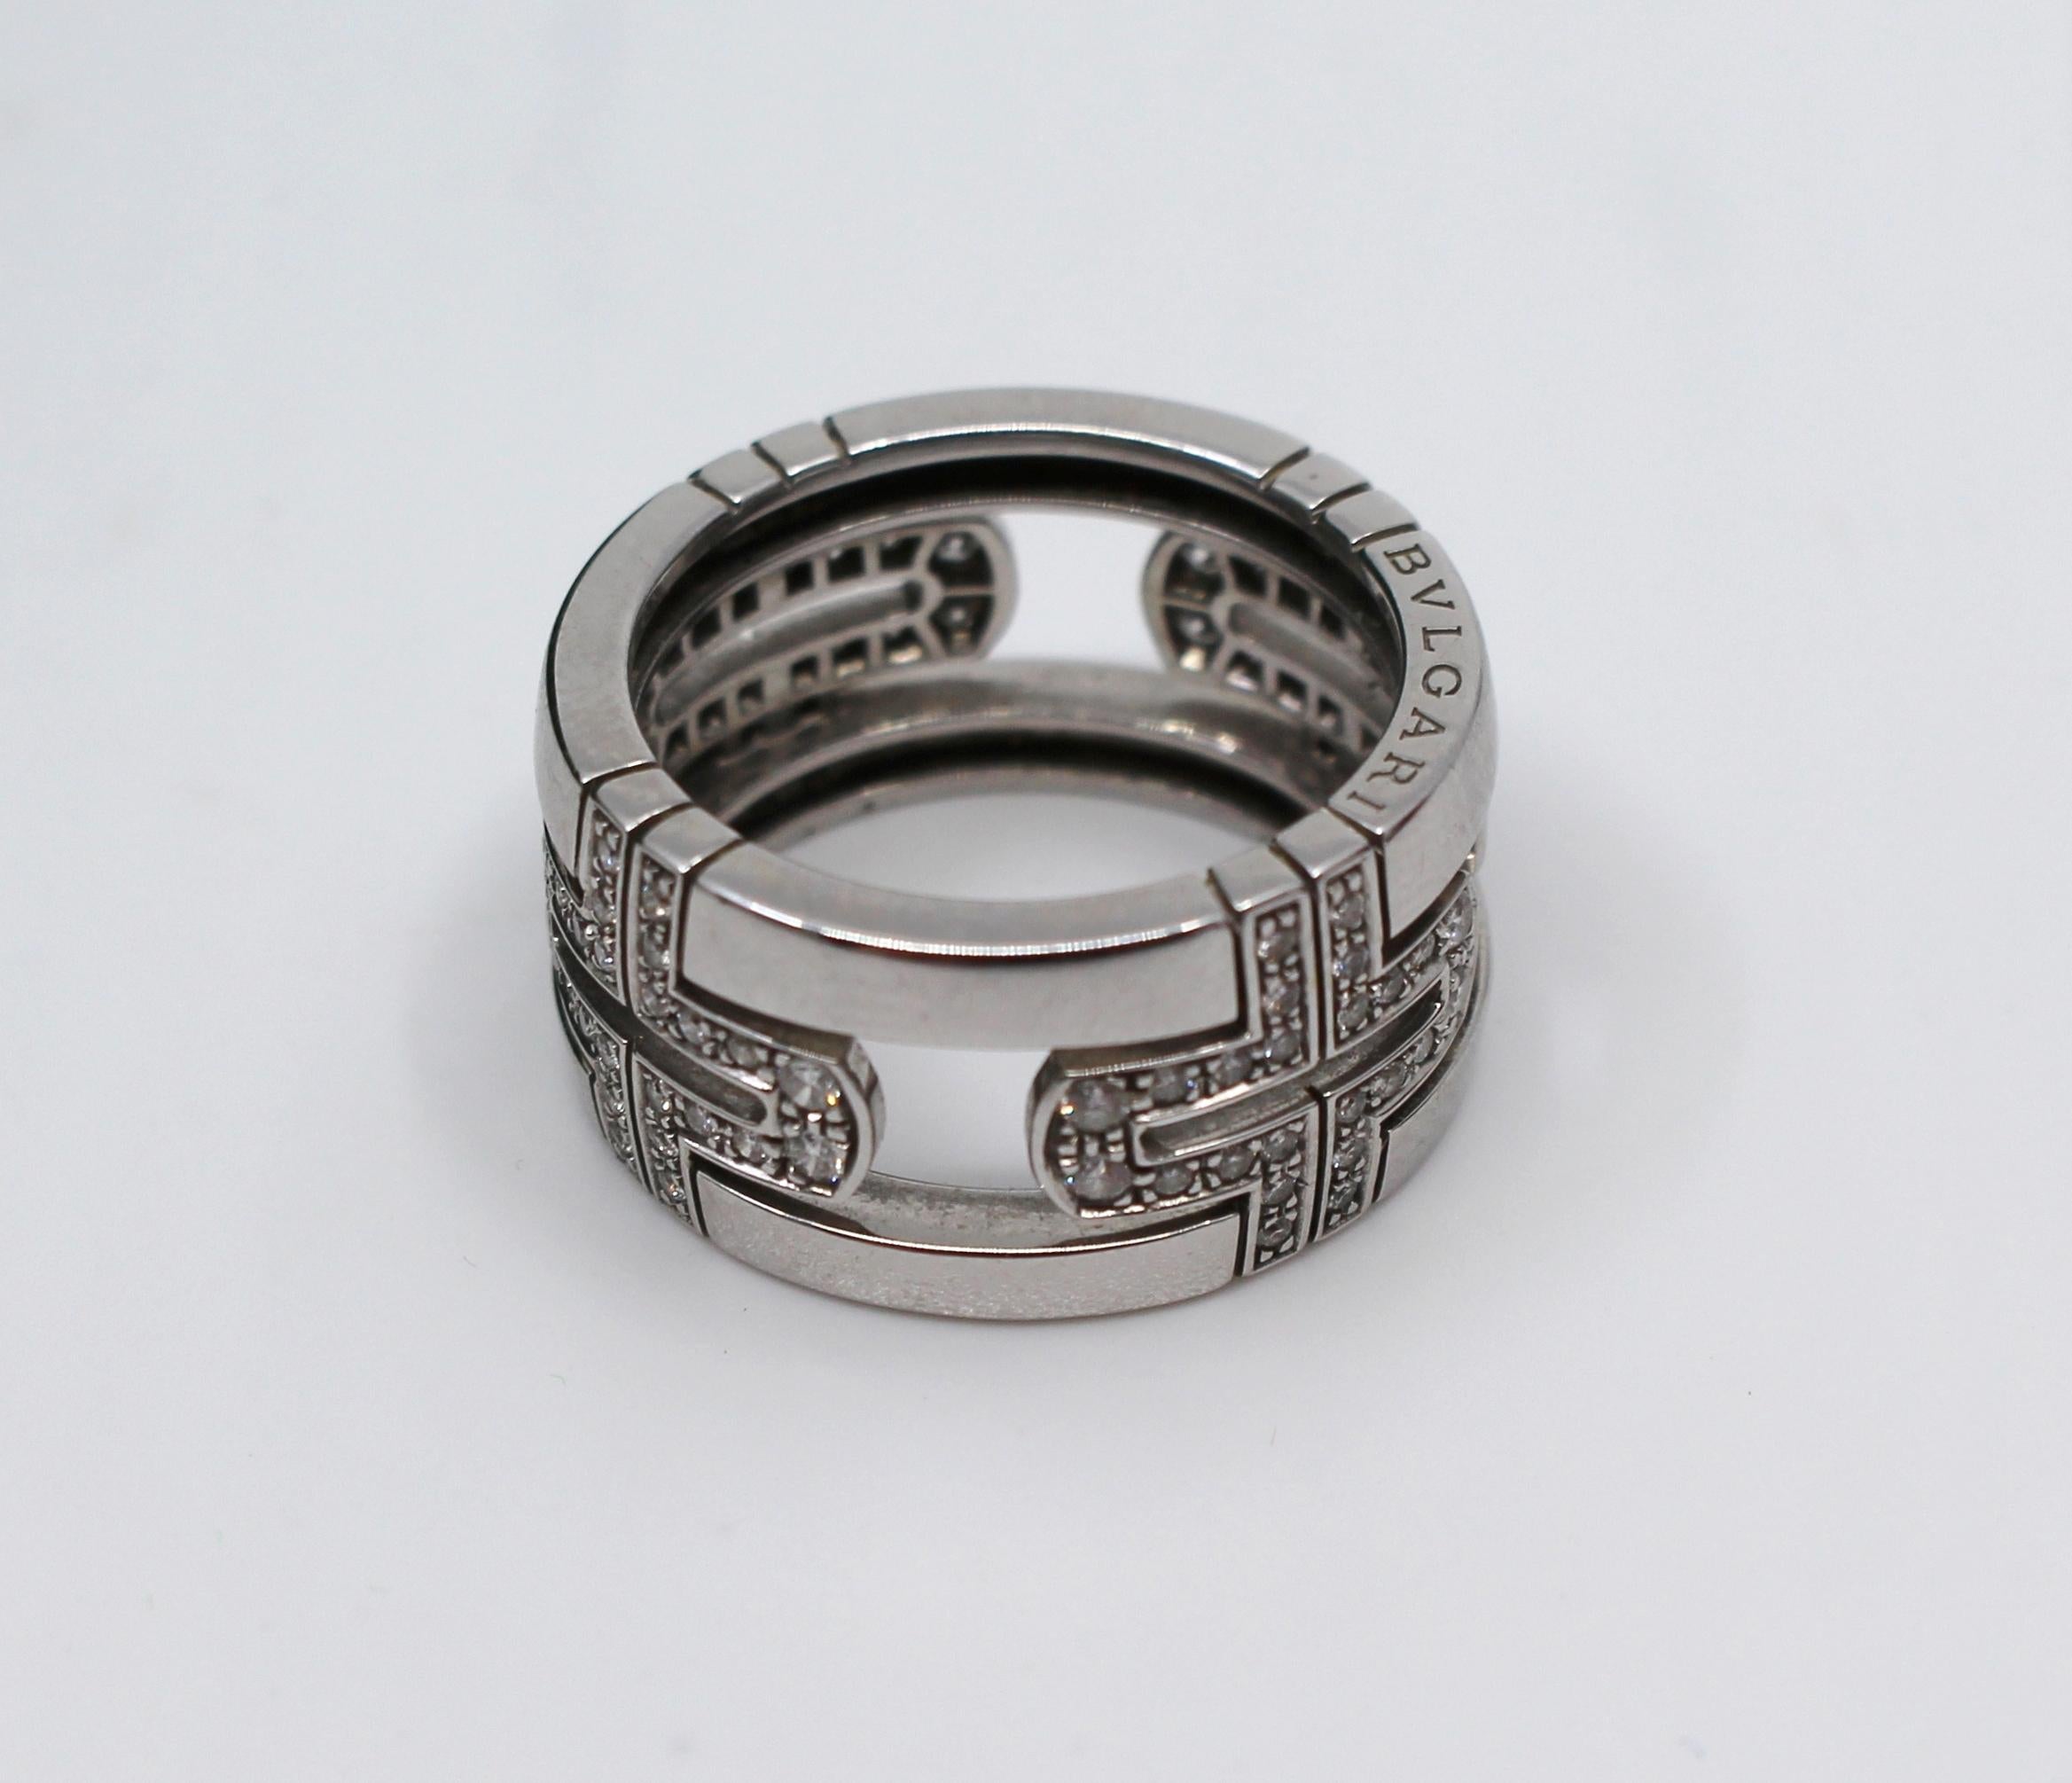 Bulgari Parentesi diamond band ring


Maker Bulgari, Italy

Diamonds Total 0.70 carat 

Weight 10.99 g

Ring size P (British), 7.75 (US)

Condition: Very good condition commensurate with age. Little wear. Fully stamped and hallmarked
